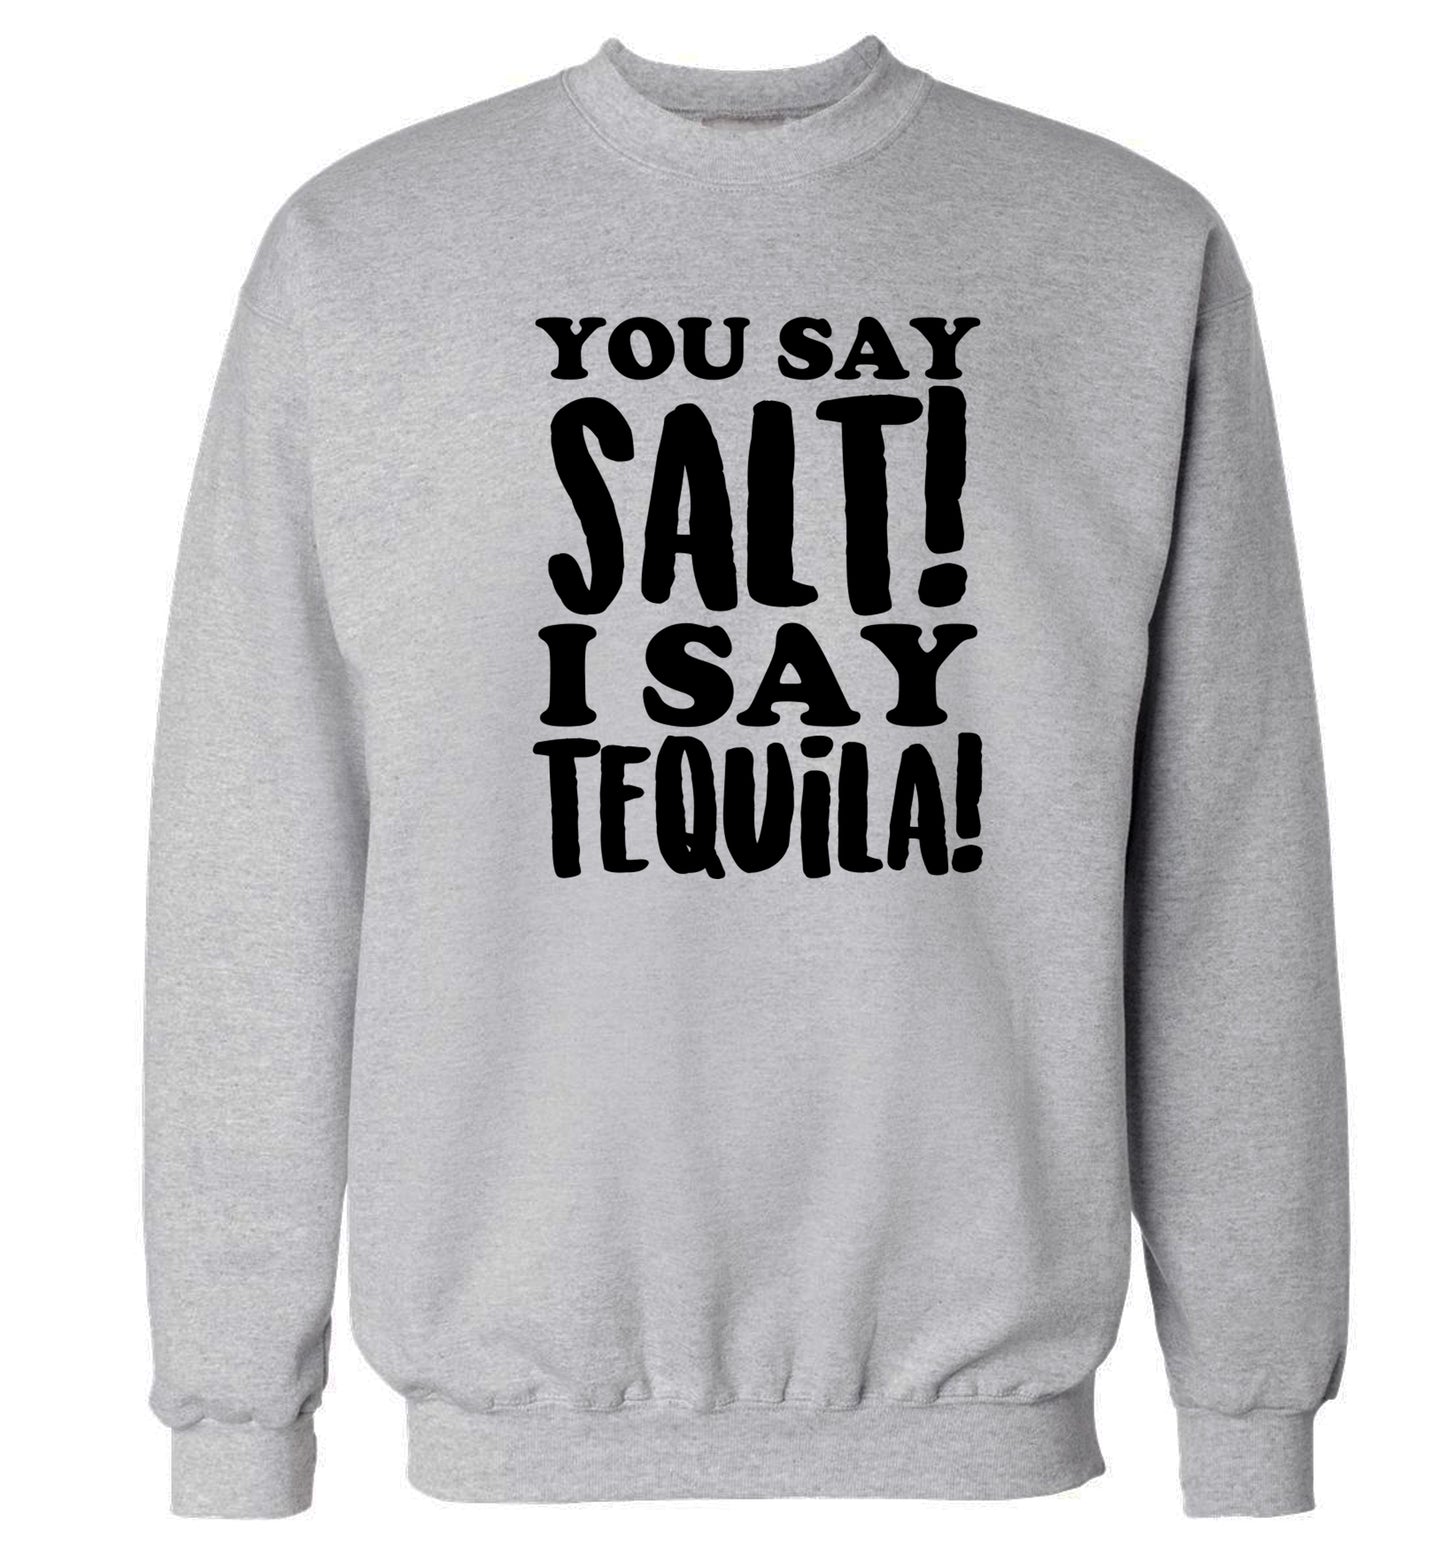 You say salt I say tequila Adult's unisex grey Sweater 2XL